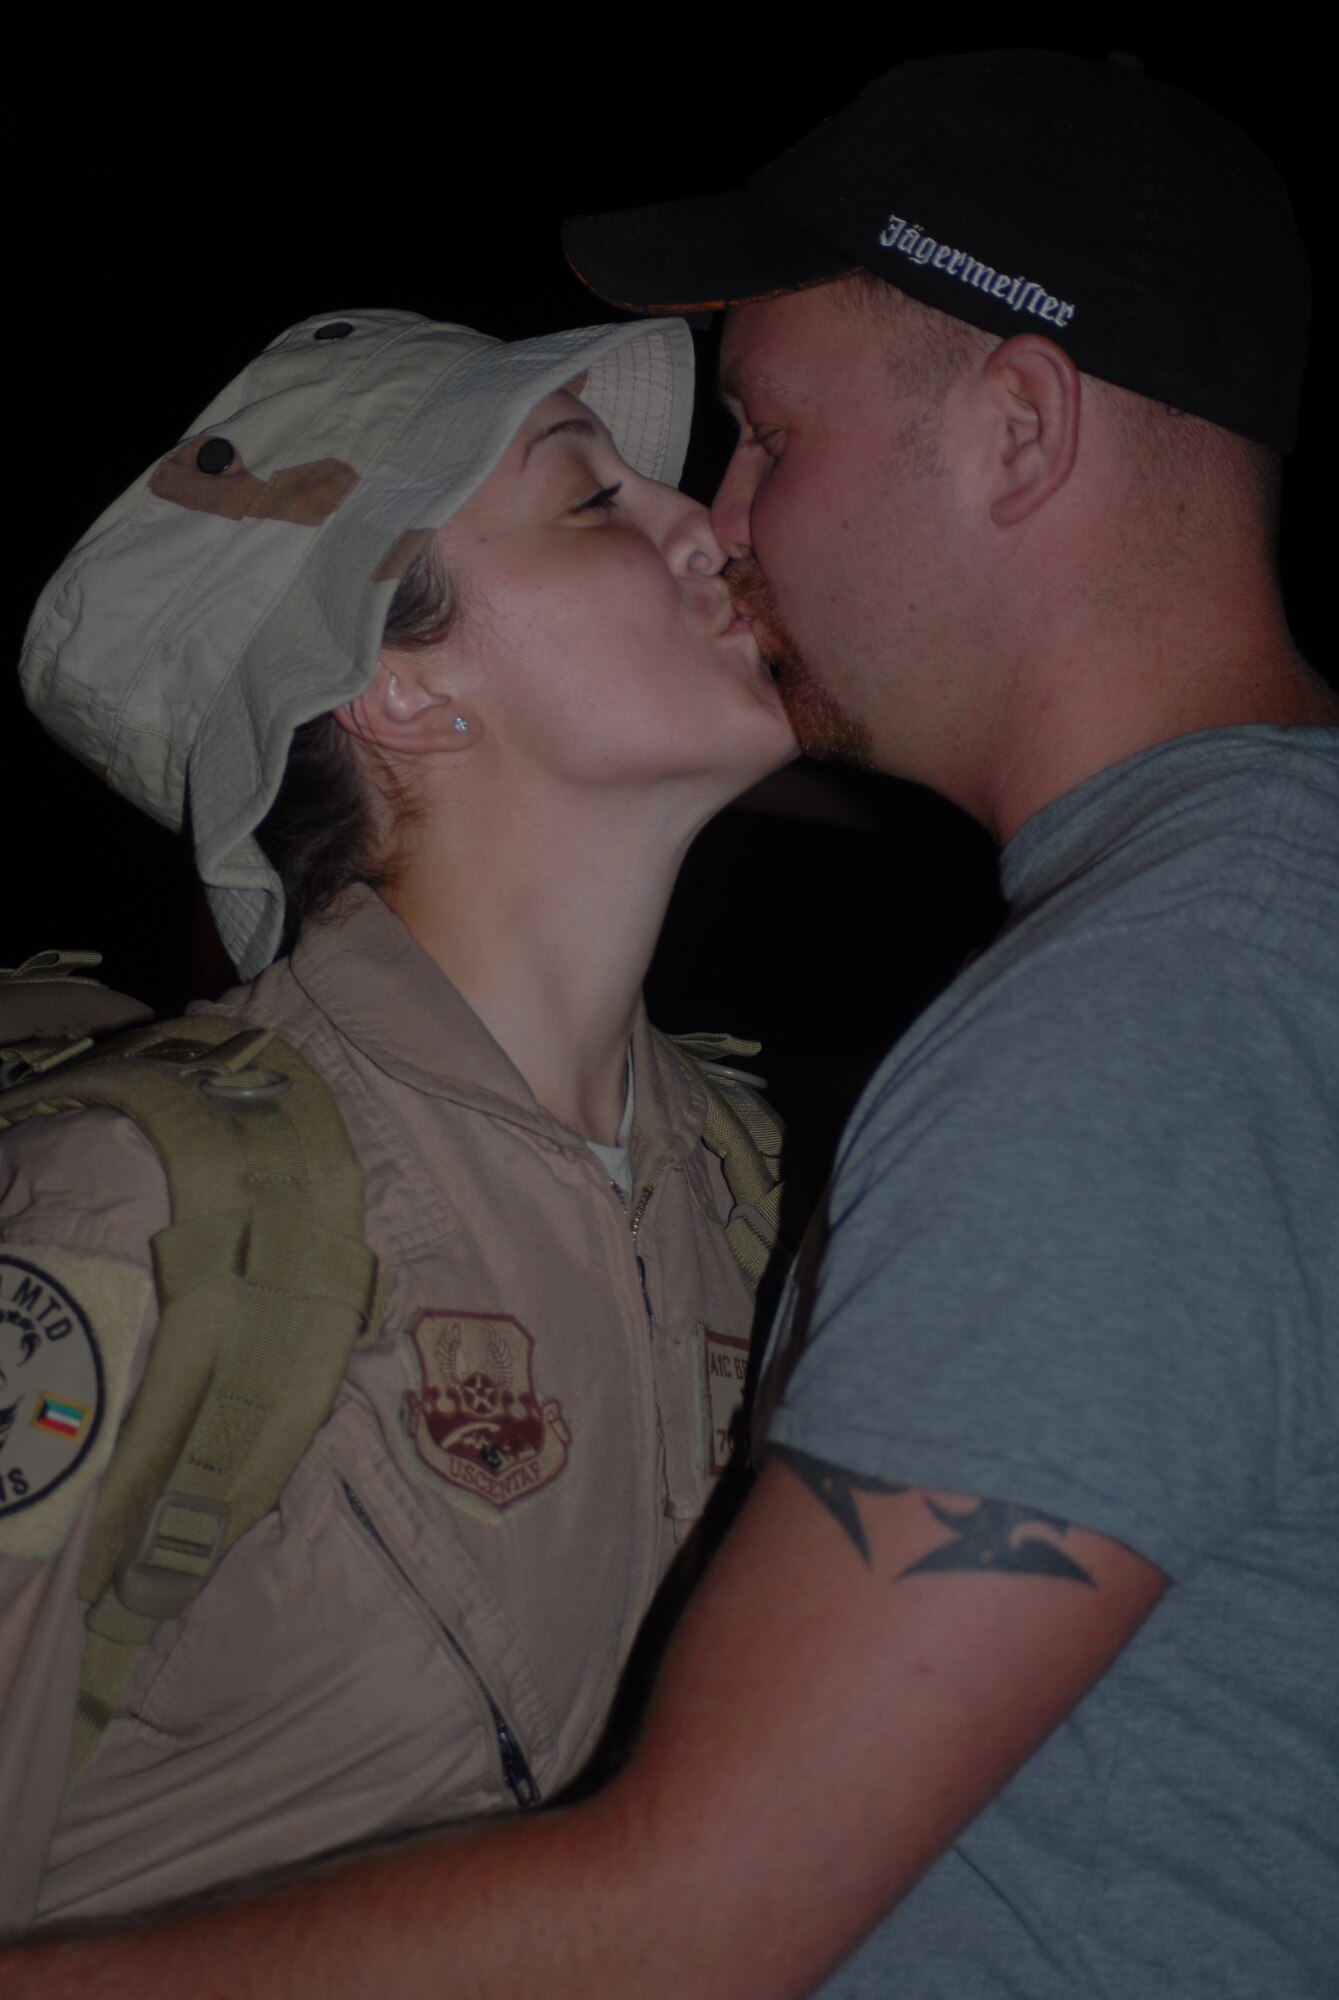 Airman 1st Class Brittany Goff, 43rd Logistics Readiness Squadron, kisses her husband Army Sergeant Jimmy Goff, upon arrival back to Pope after eight months away. (U.S. Air Force Photo by Airman 1st Class Mindy Bloem)